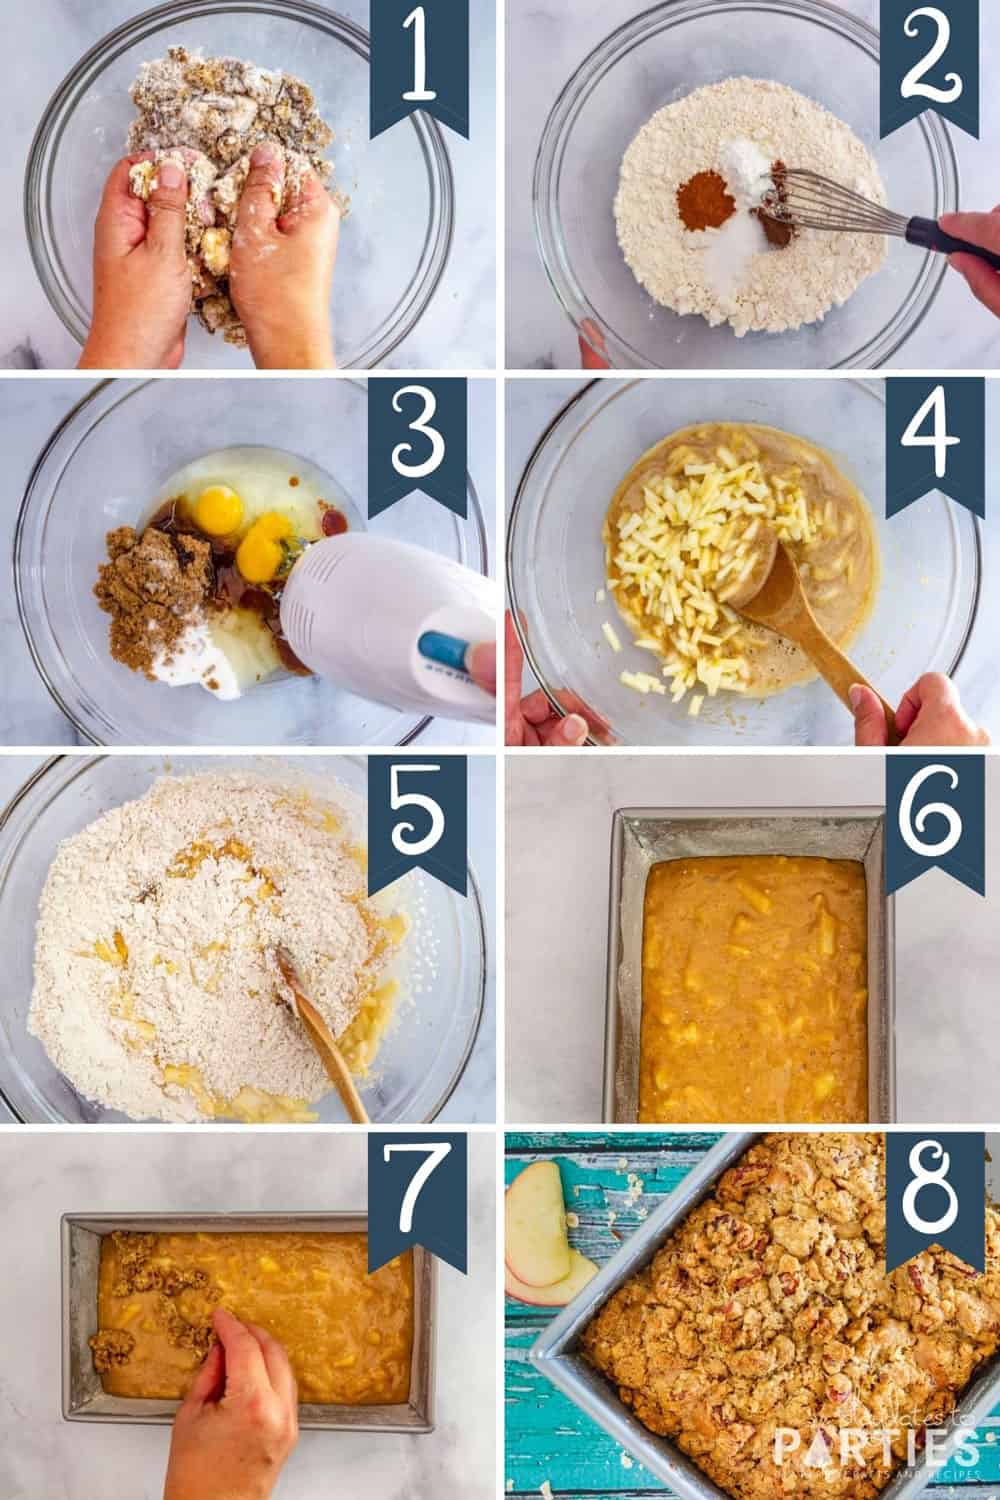 steps 1-8 for making apple bread with streusel topping